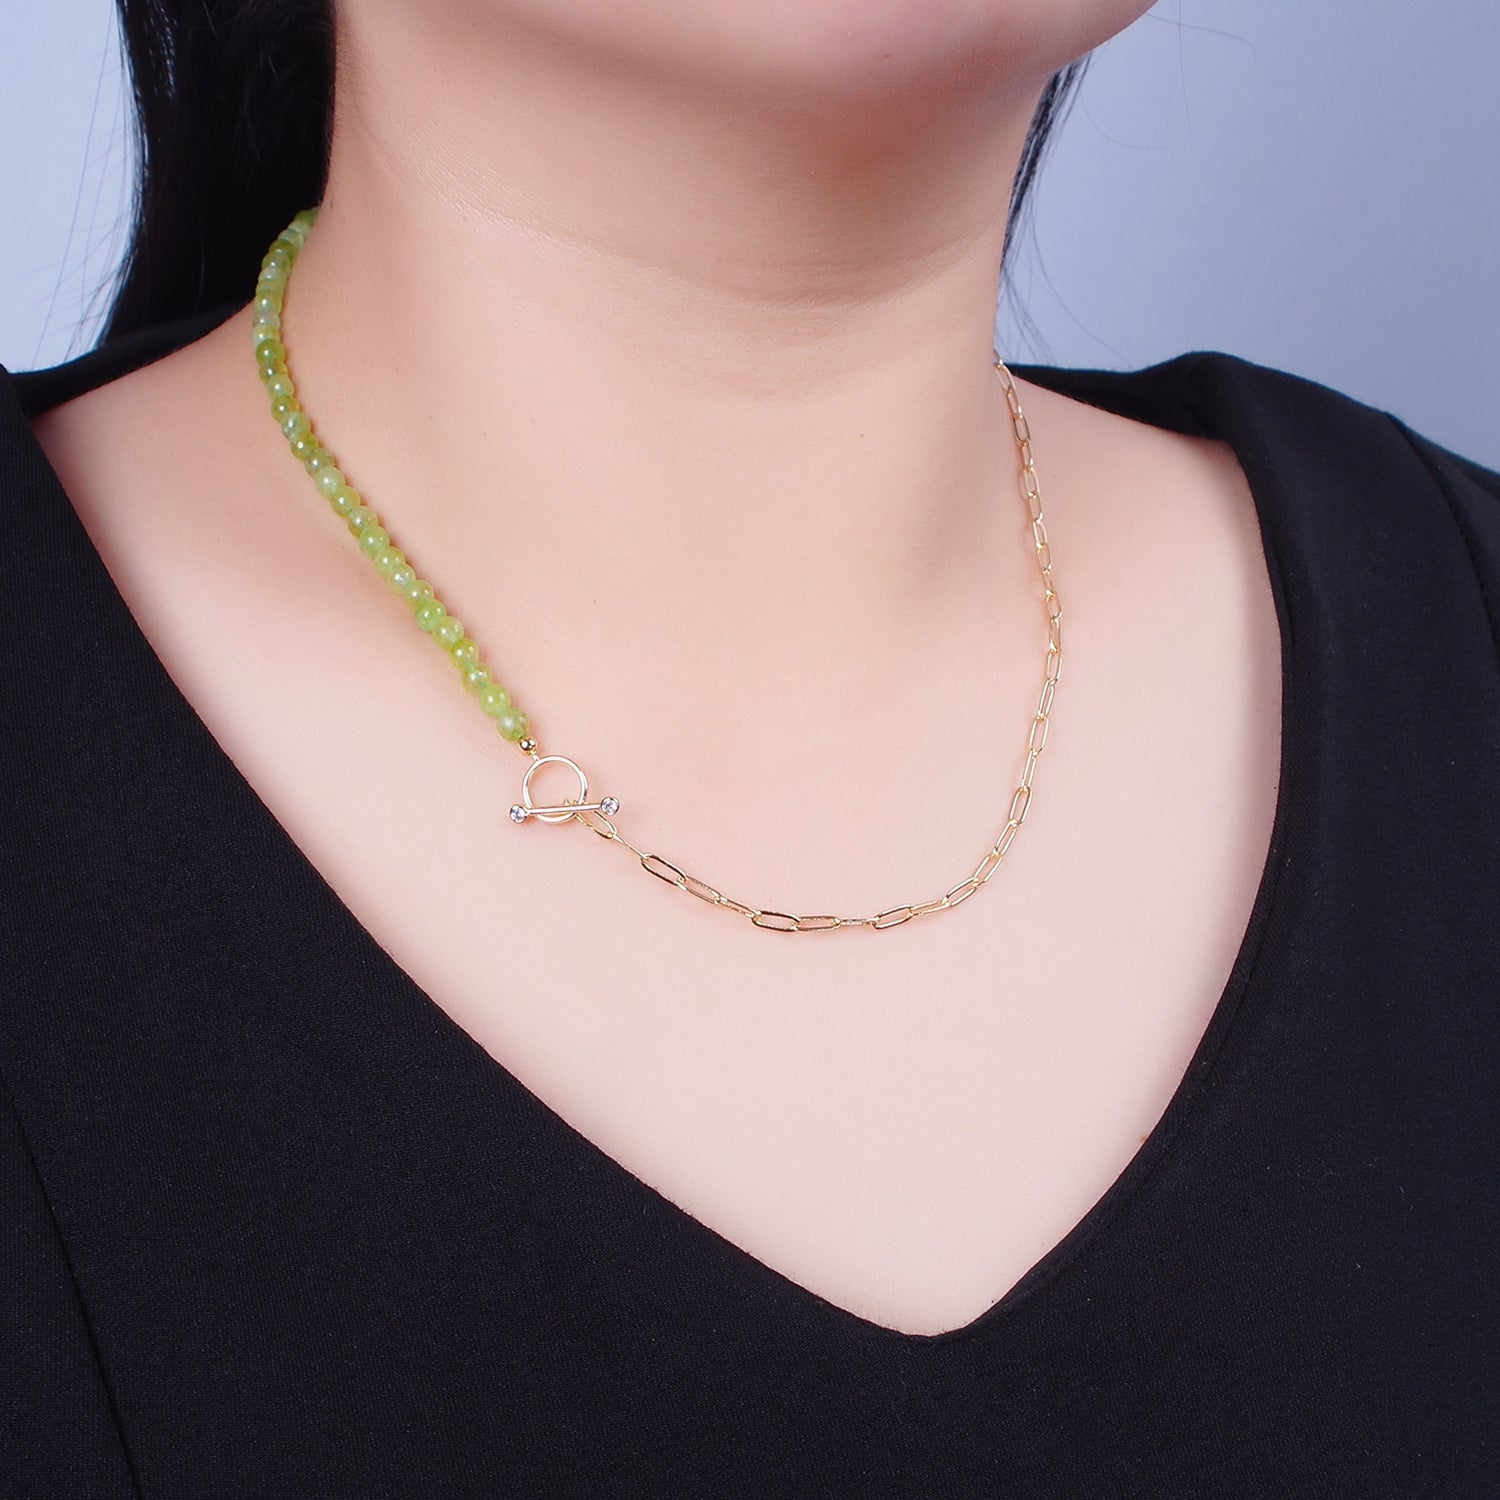 Dainty Half Bead Half Link Chain Necklace, 24k Gold Filled Paperclip Chain with Green Jade Necklace Toggle Clasp WA-960 - DLUXCA